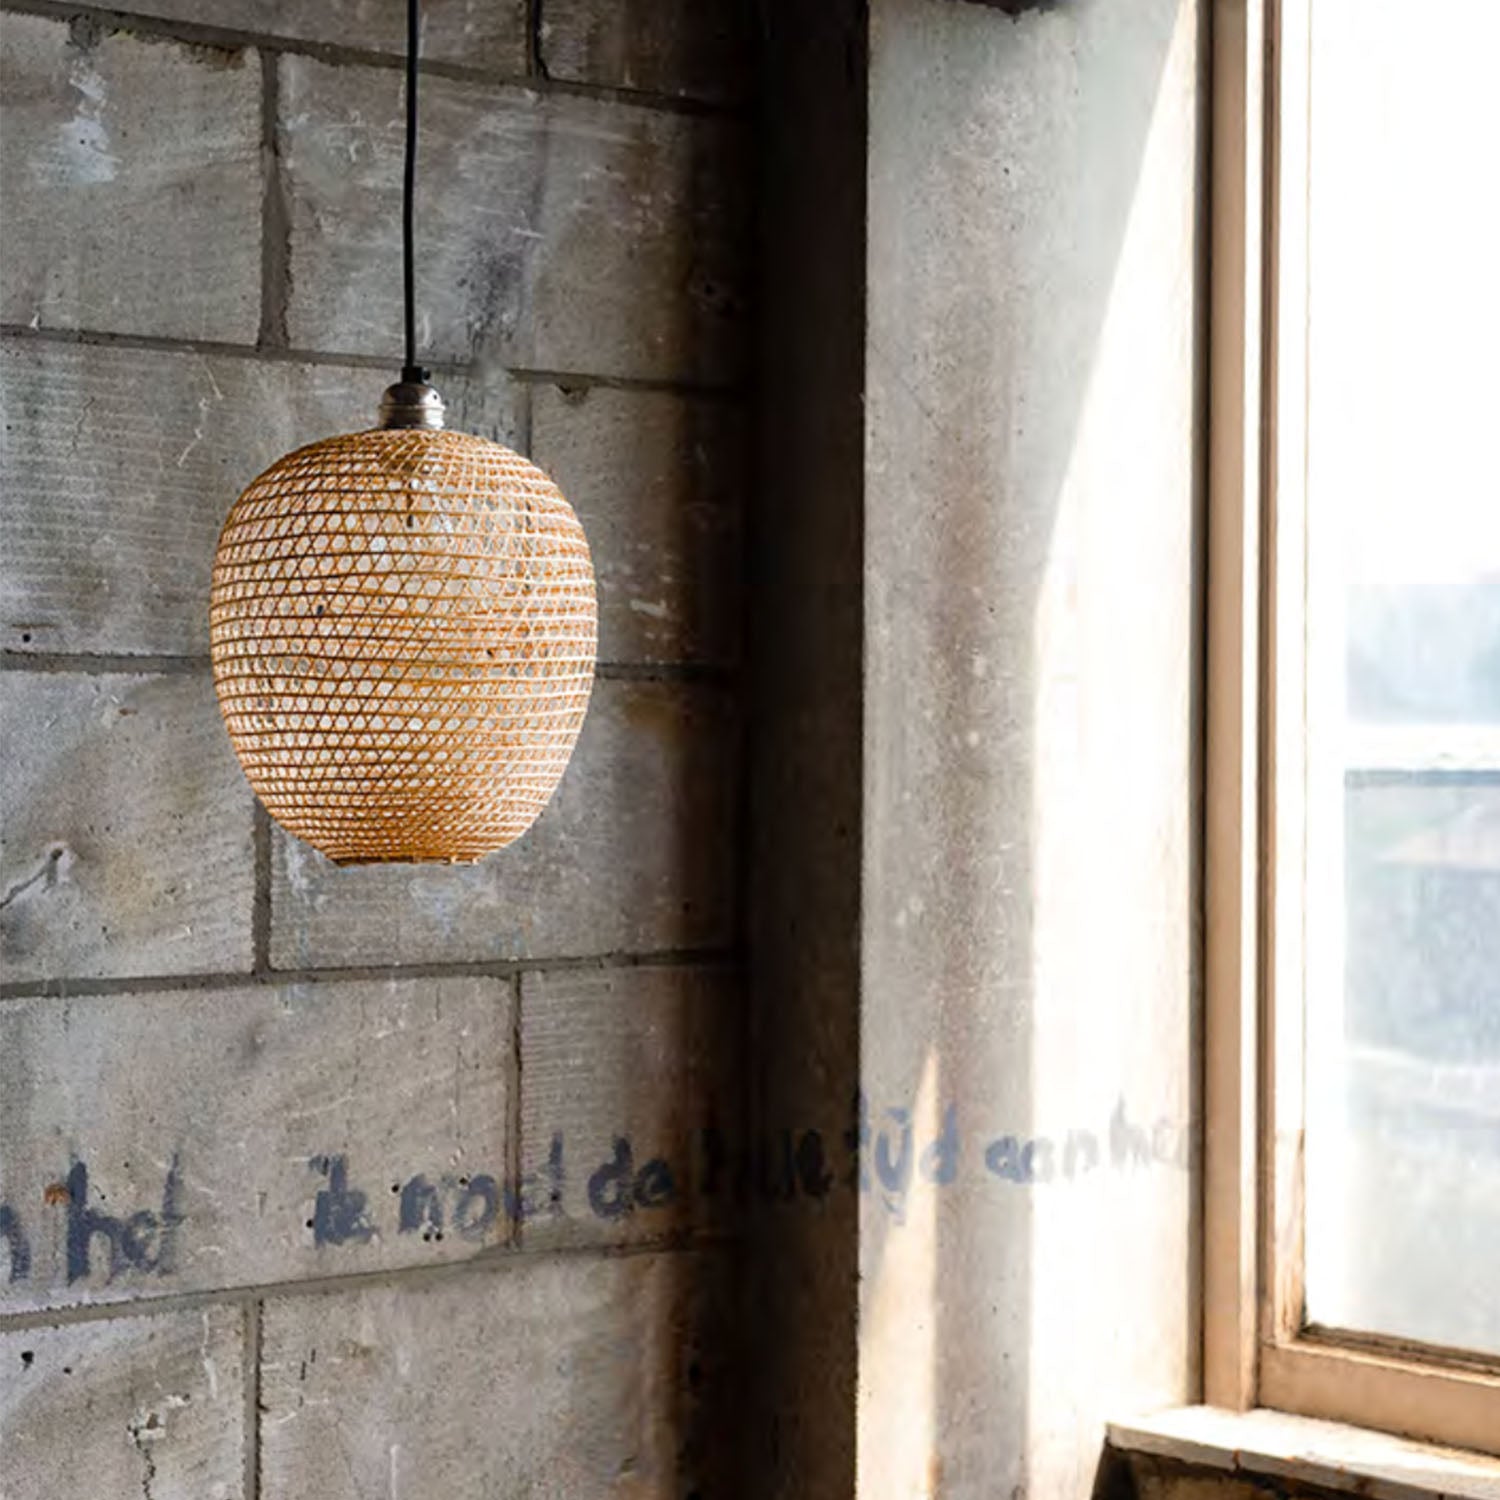 POY - Oval pendant light in hand-woven natural bamboo